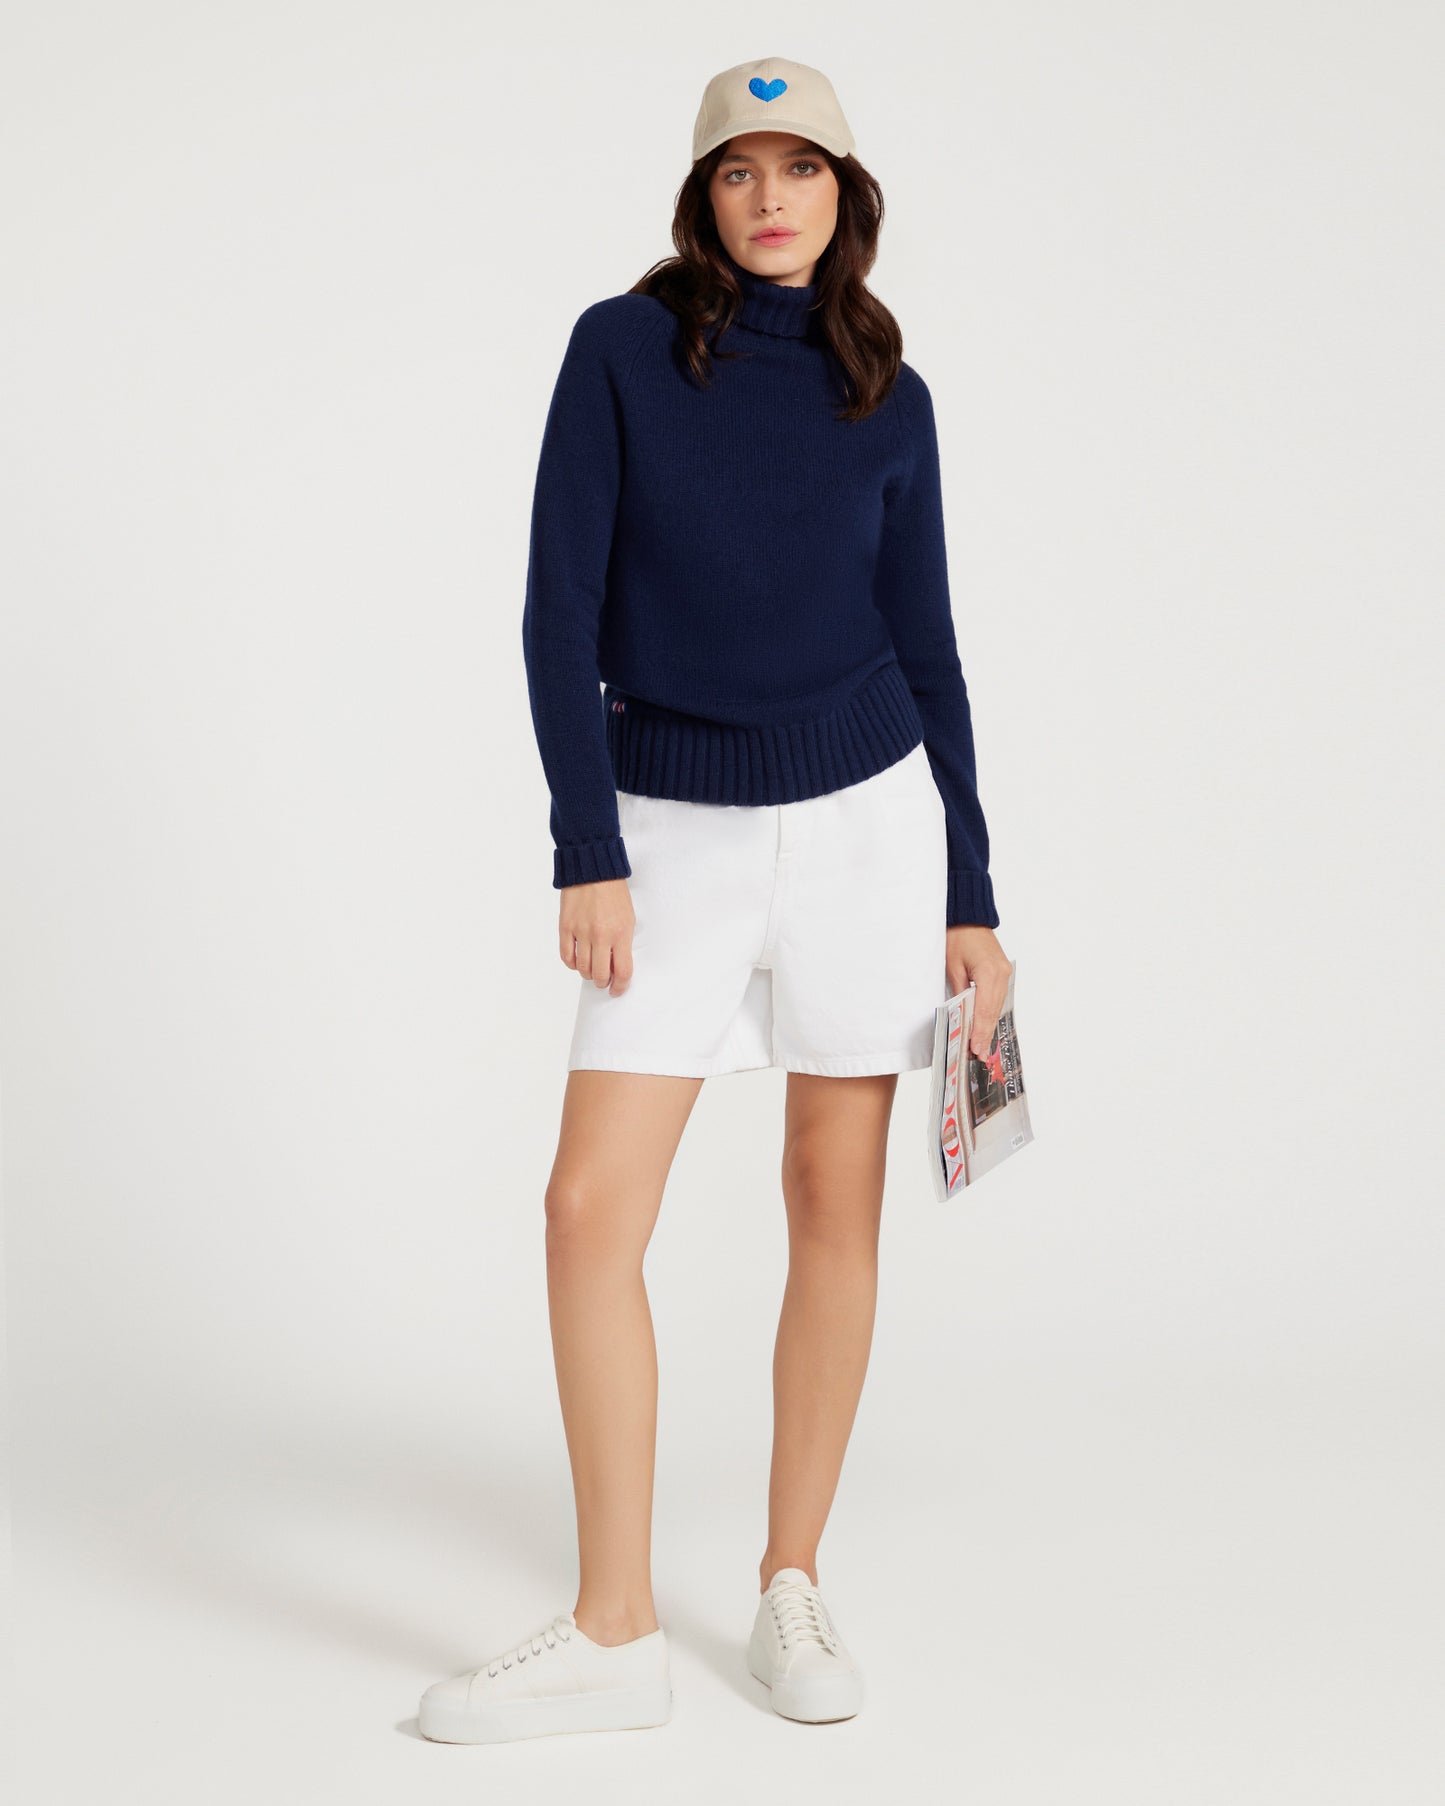 Lux Cashmere & Wool Navy Blue Polo Neck Jumper